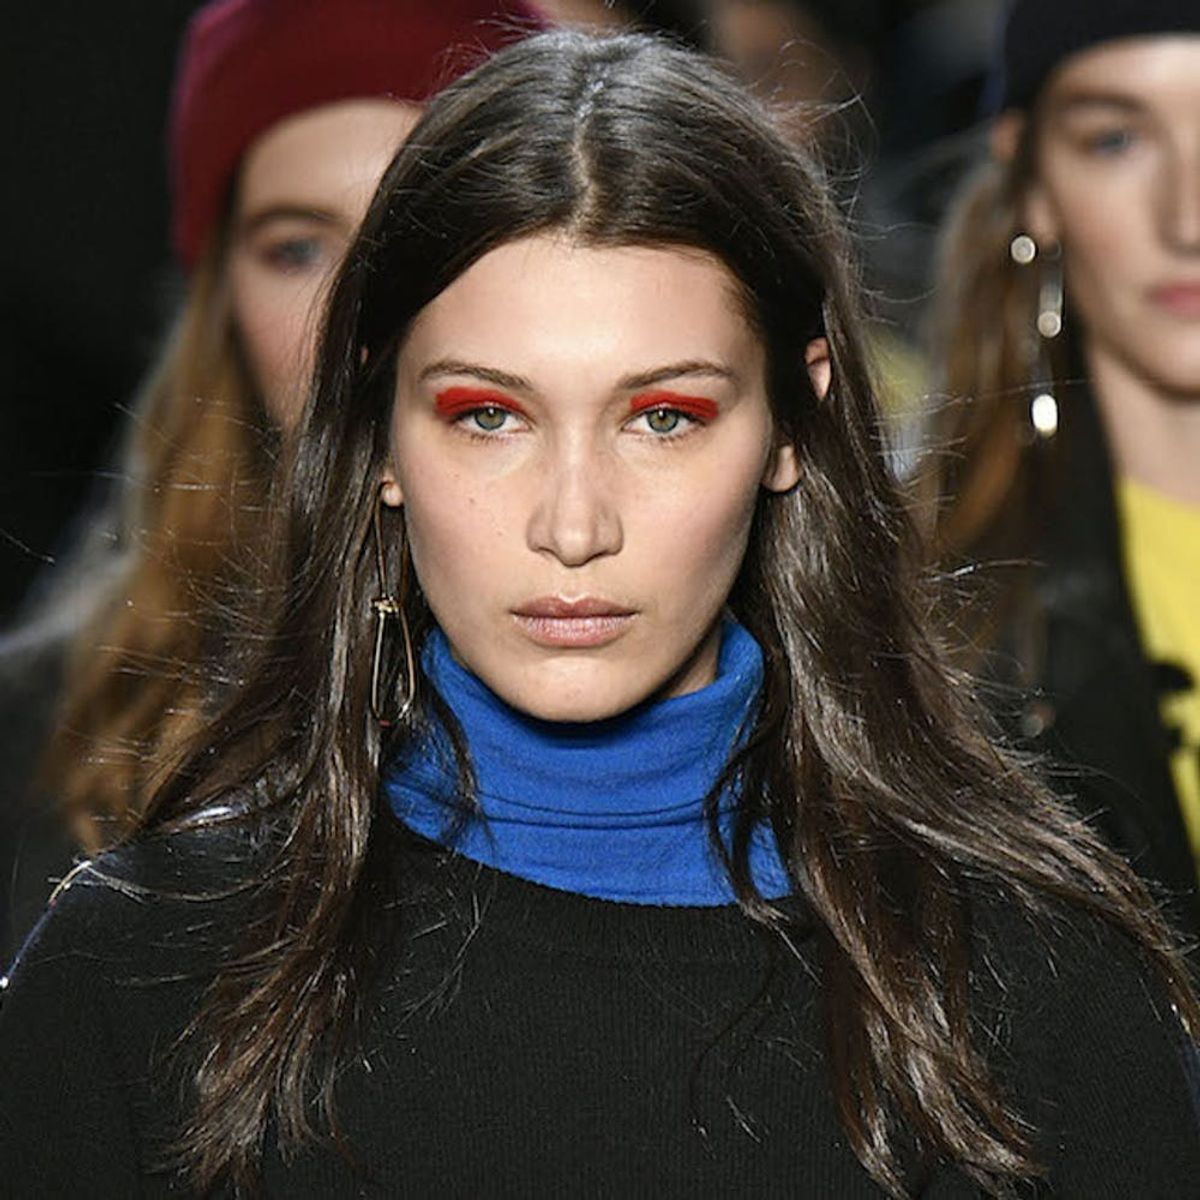 Why Bella Hadid Cried at Two Fashion Shows This Week